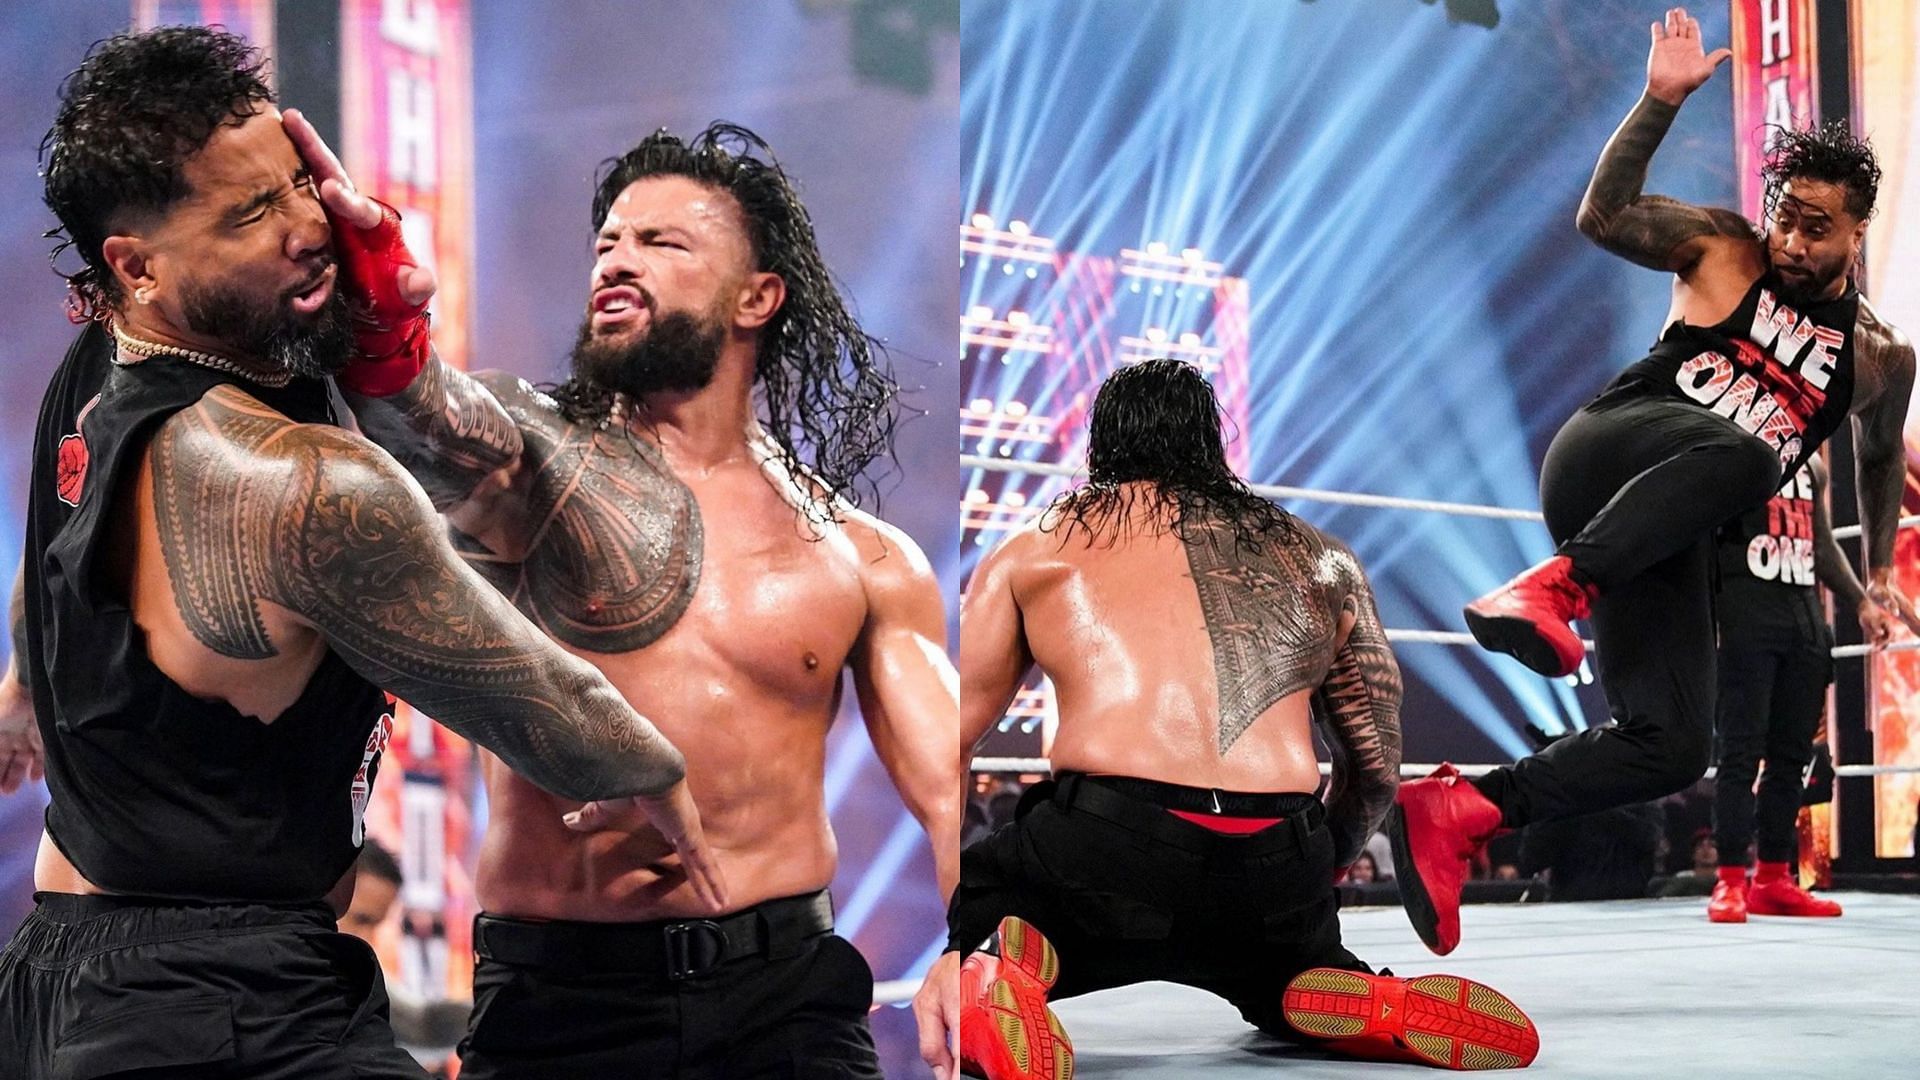 Jimmy Uso superkicked Roman Reigns at WWE Night of Champions